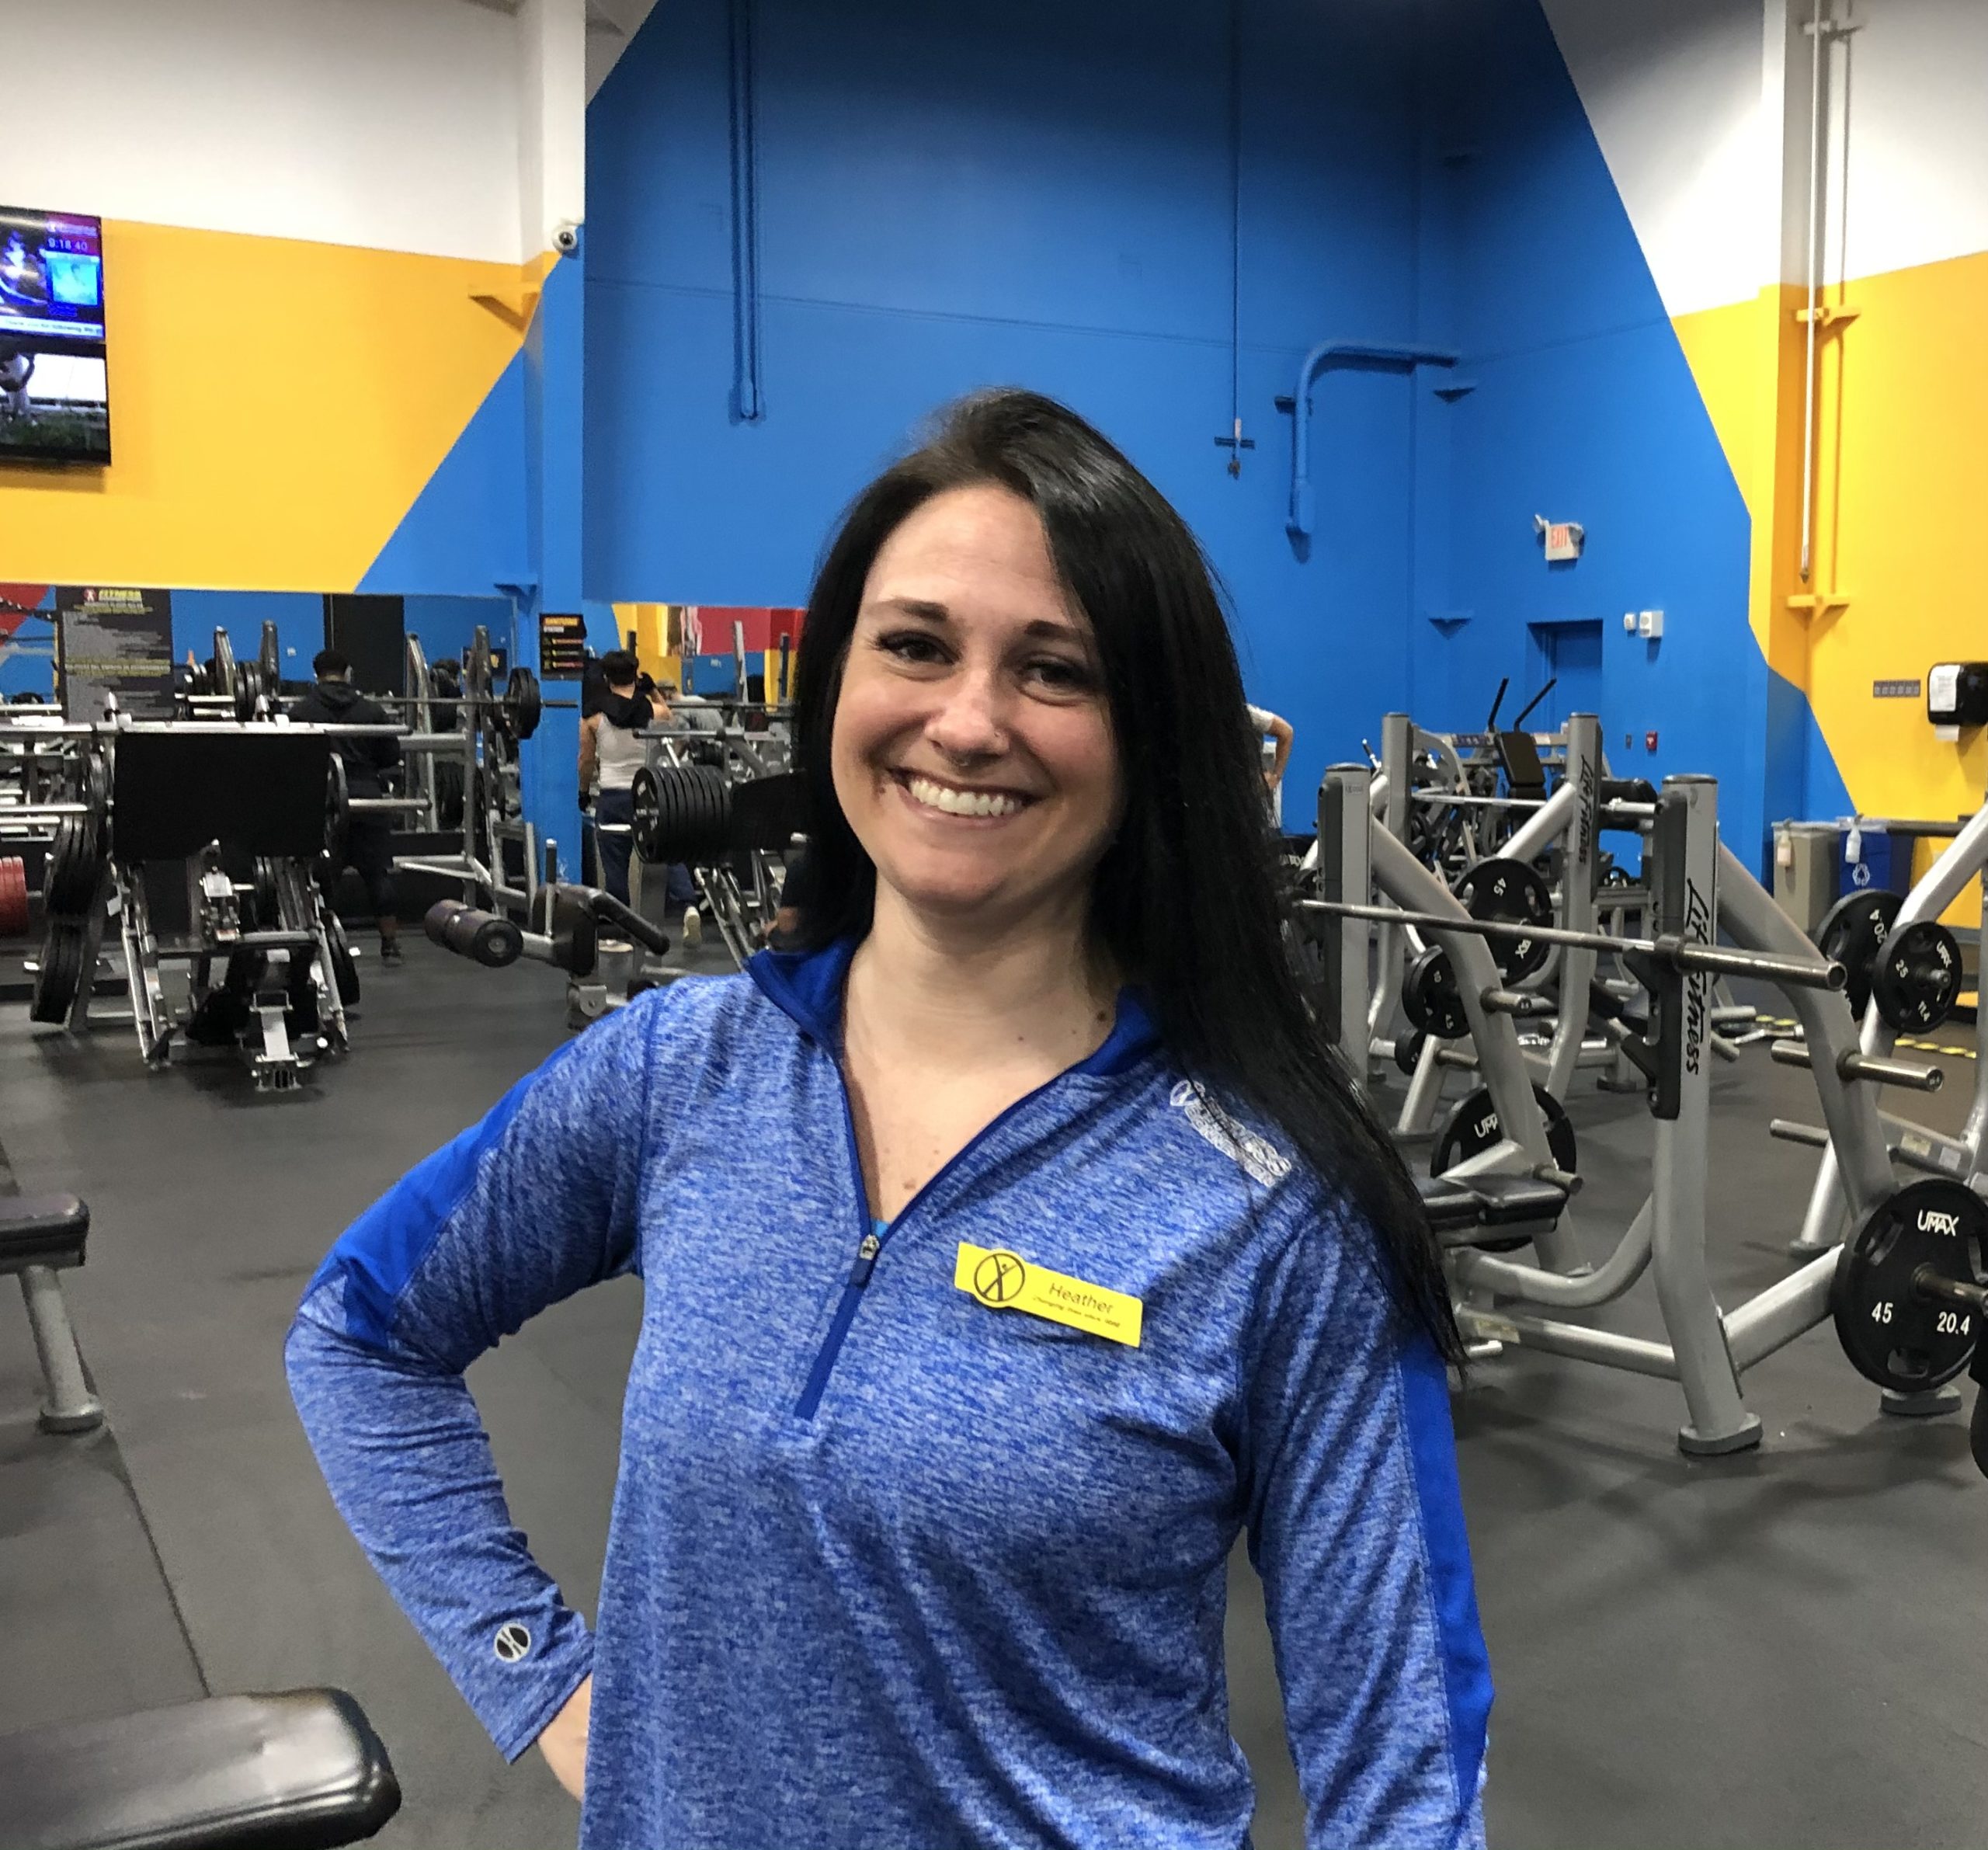 Heather Hyde Club Manager at Fitness Connection - Eastside